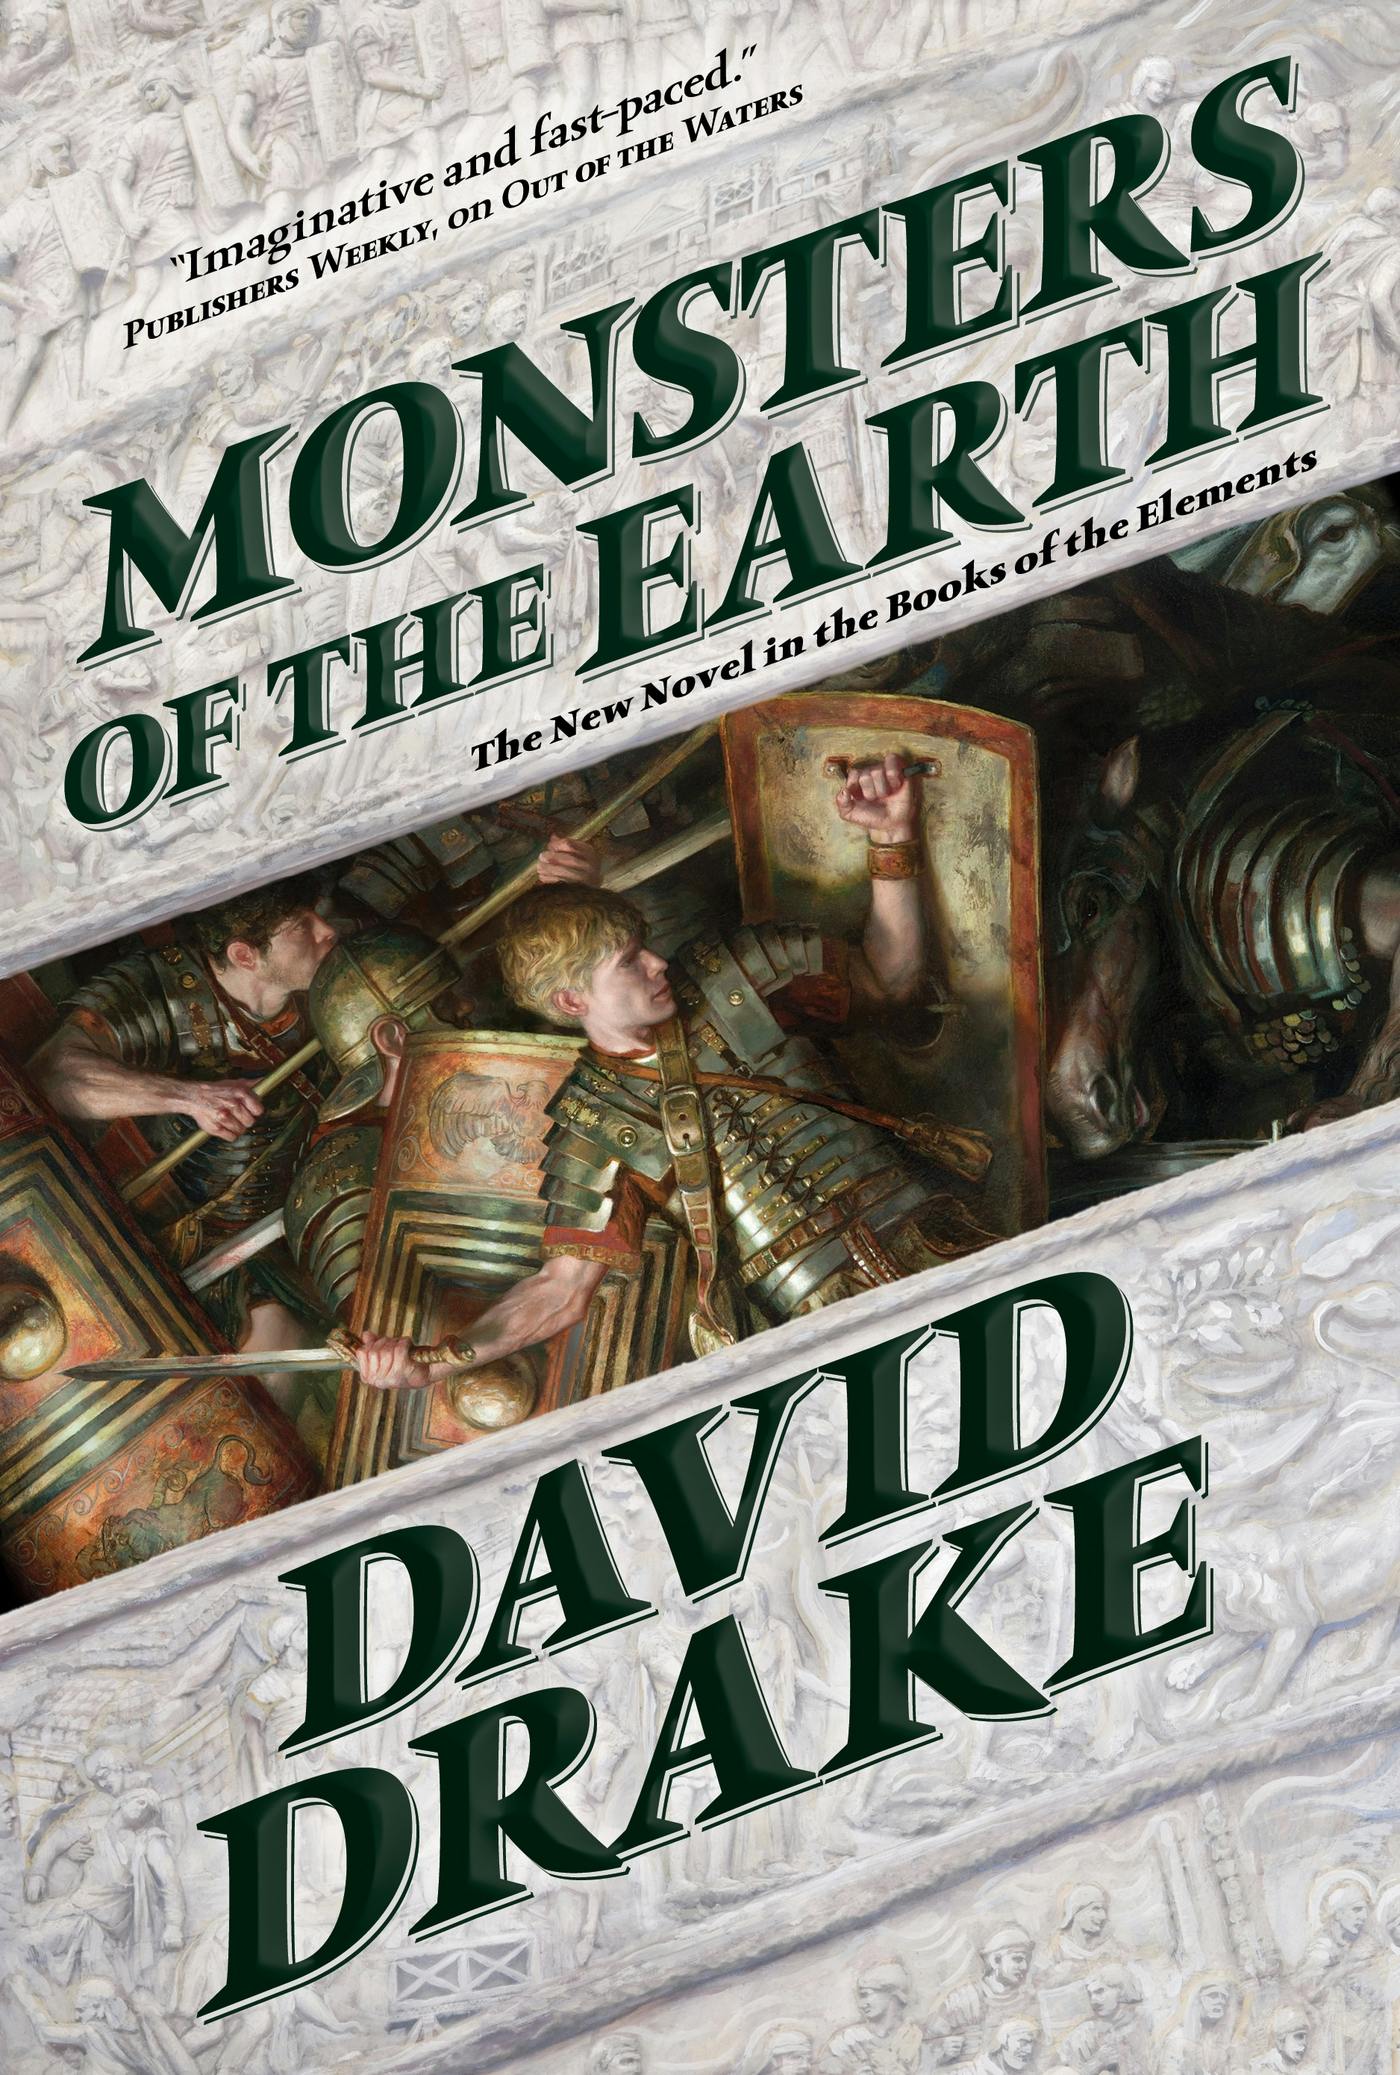 Cover for the book titled as: Monsters of the Earth